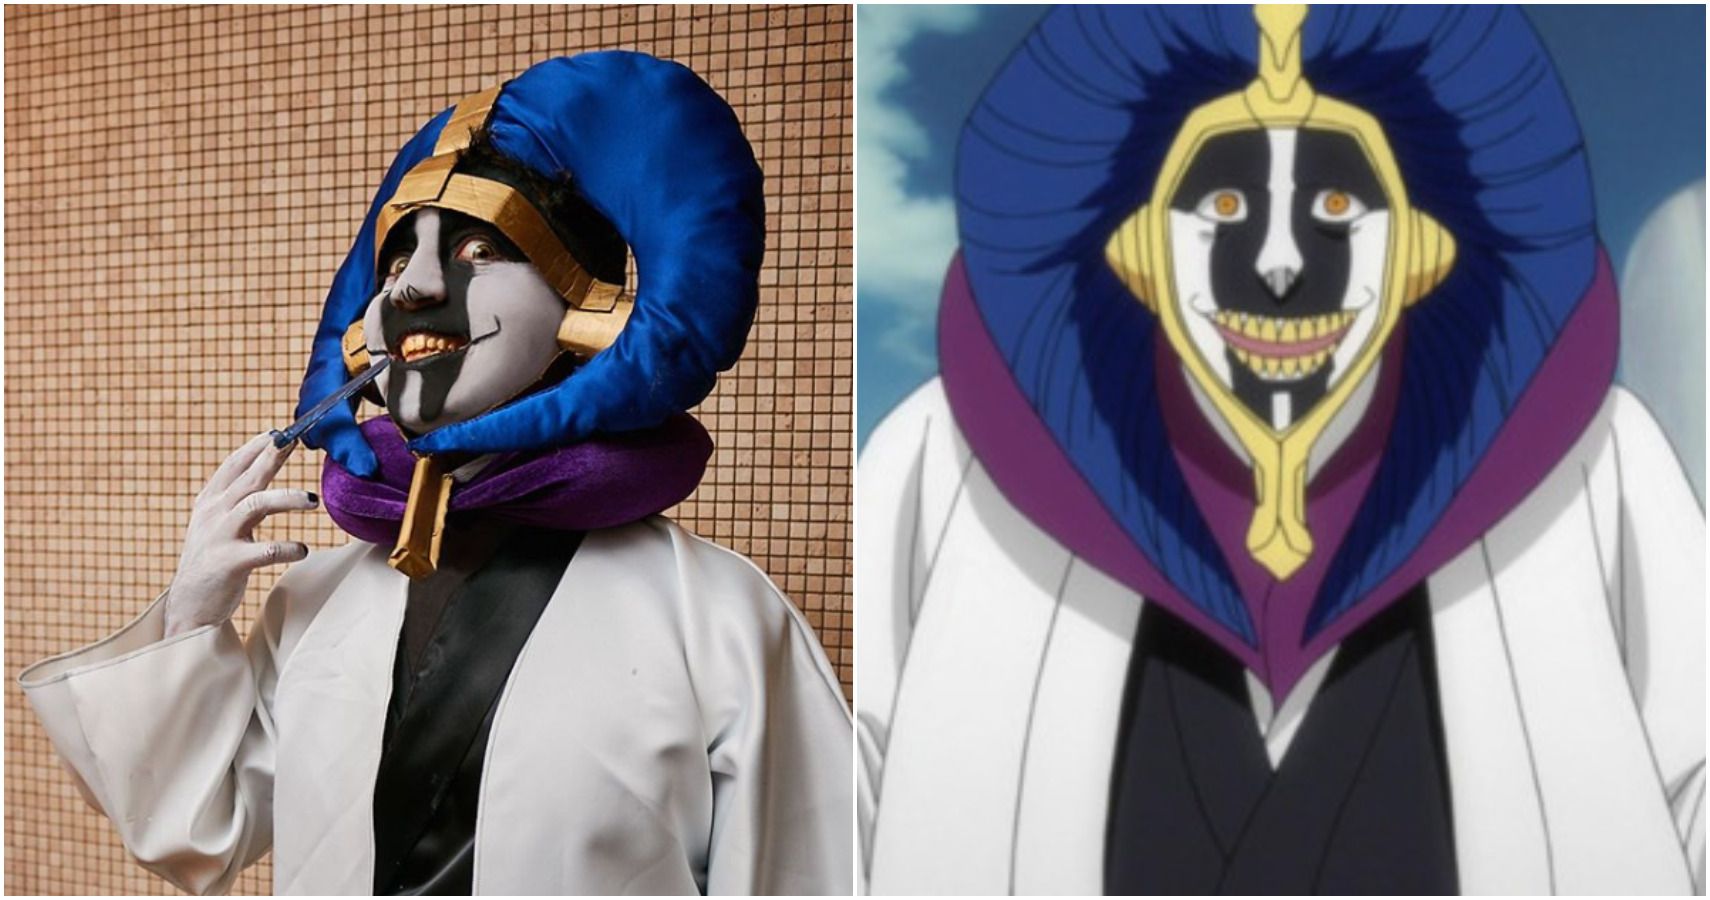 Mayuri Kurotsuchi Who is the Most Powerful Character in the Anime Series Bleach?